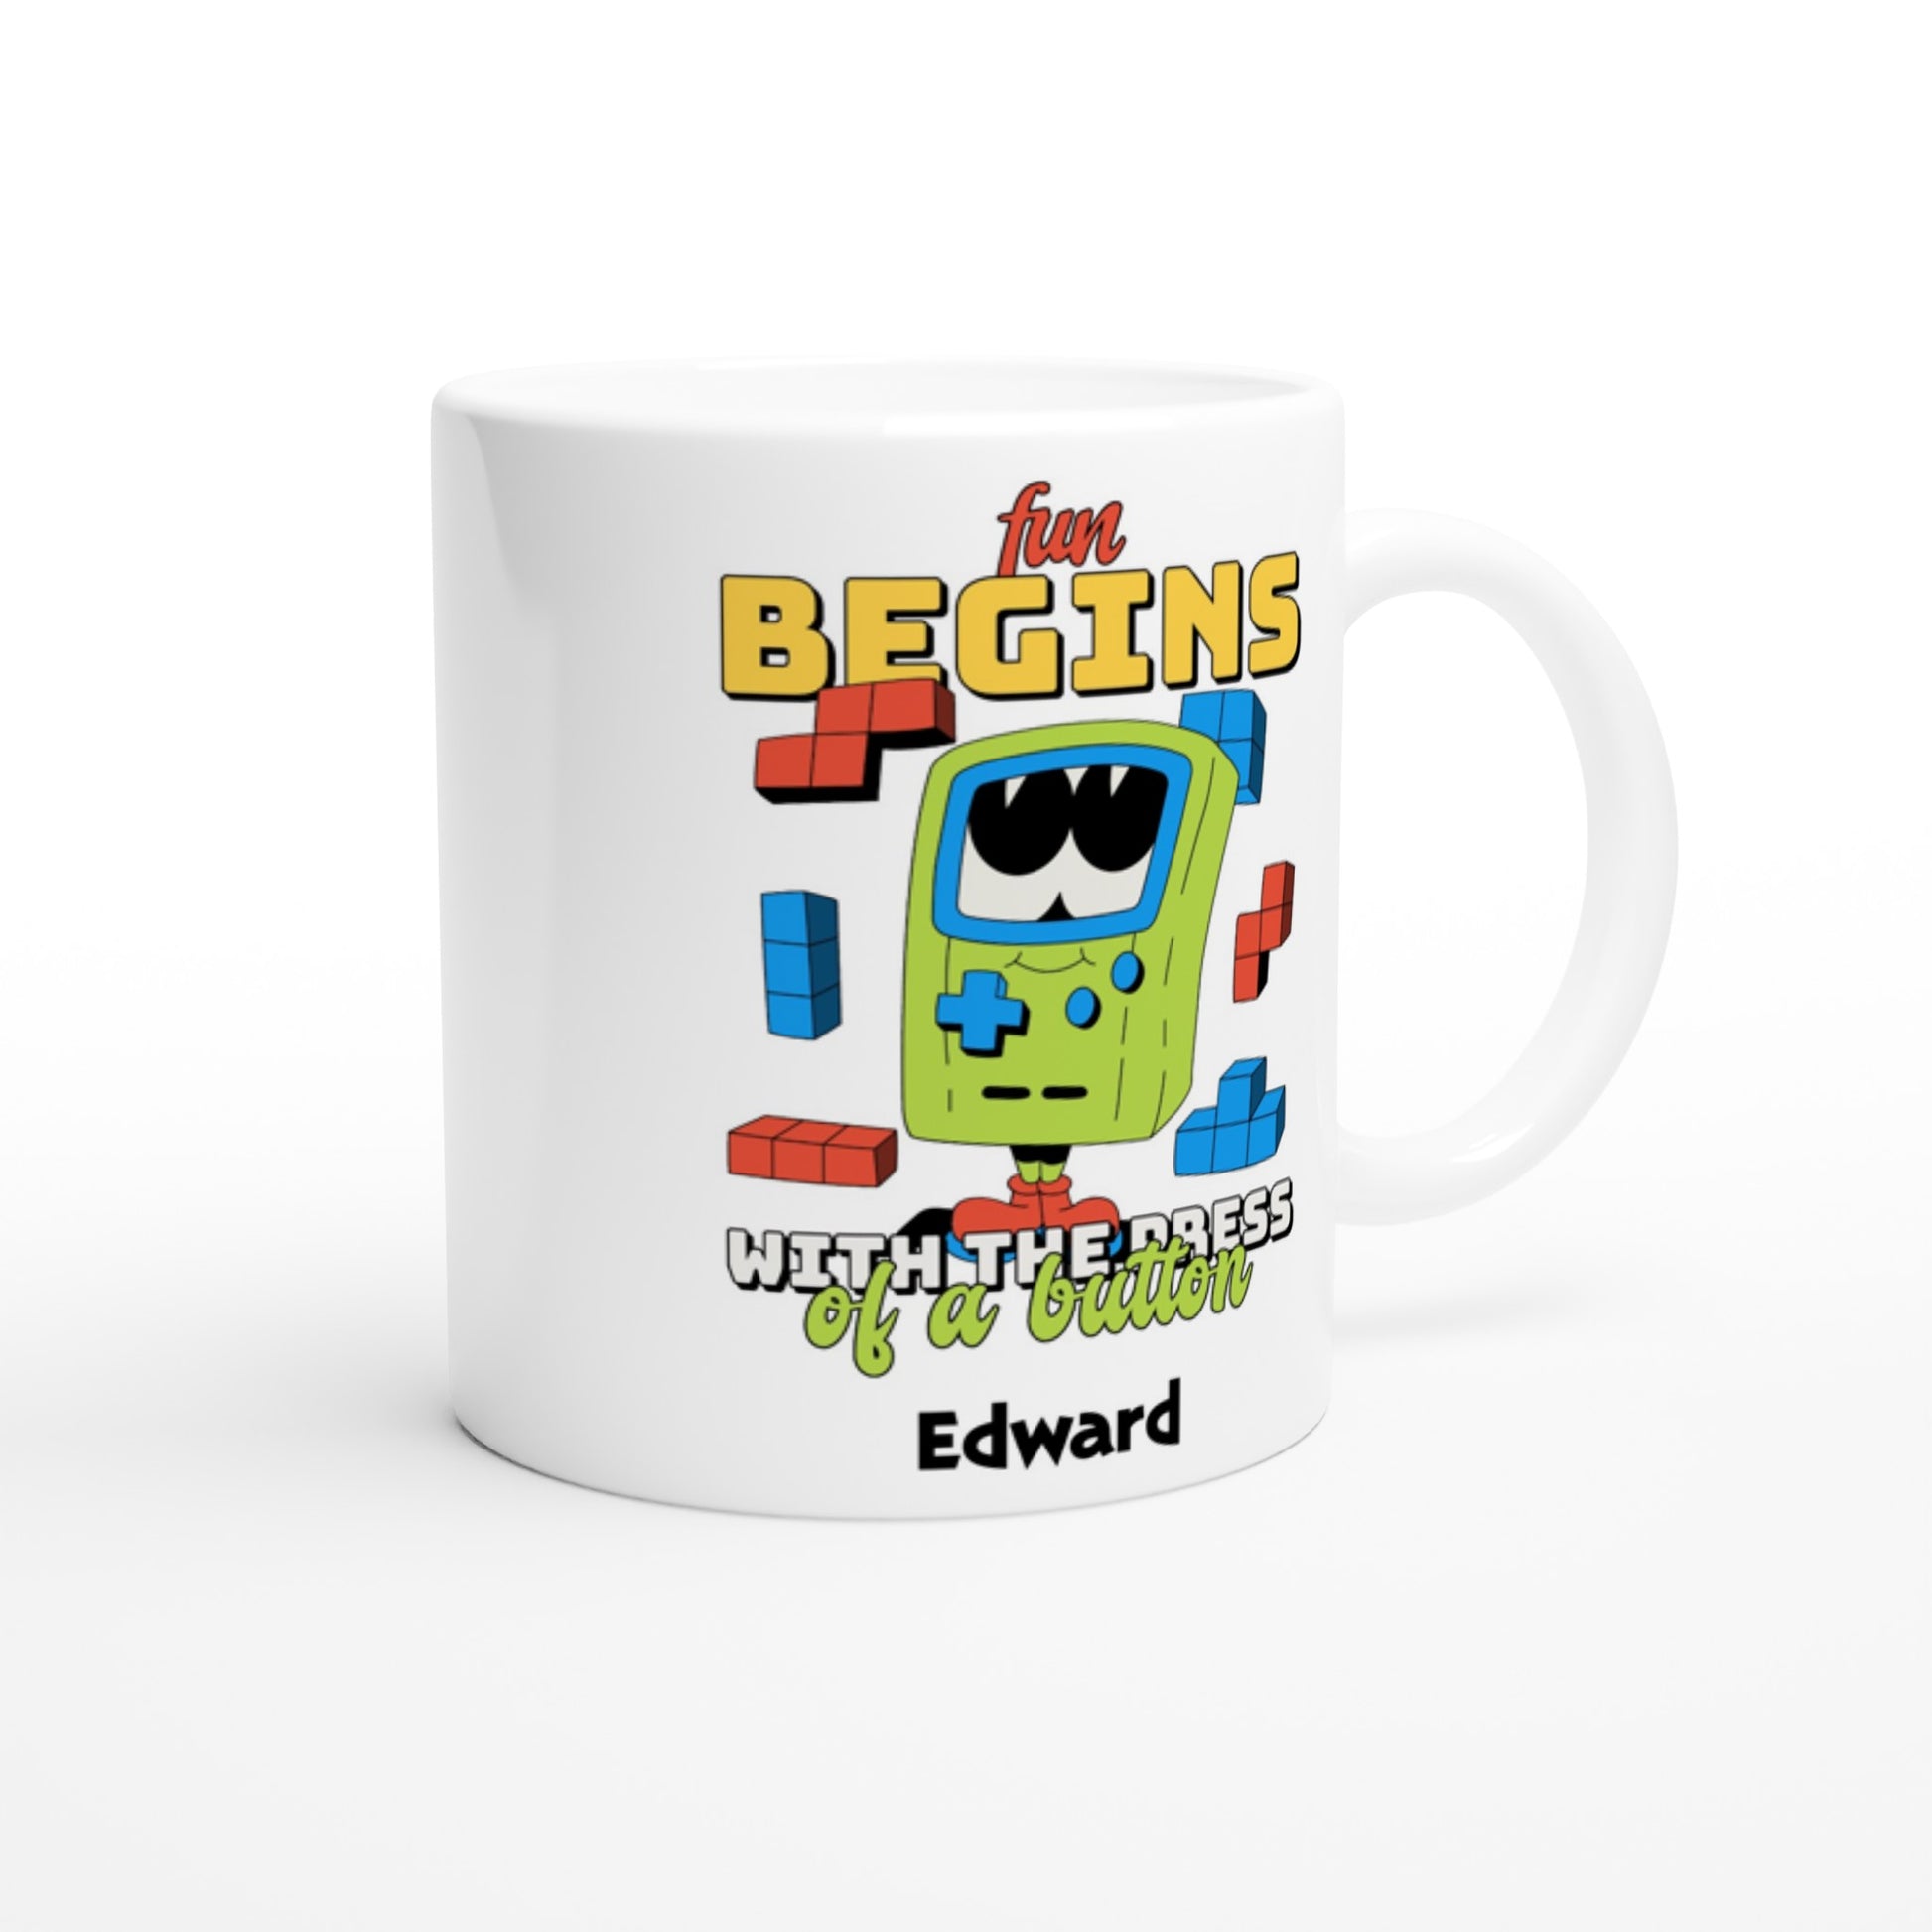 Personalise - Fun Begins With The Press Of A Button - White 11oz Ceramic Mug Personalised Mug customise Games personalise